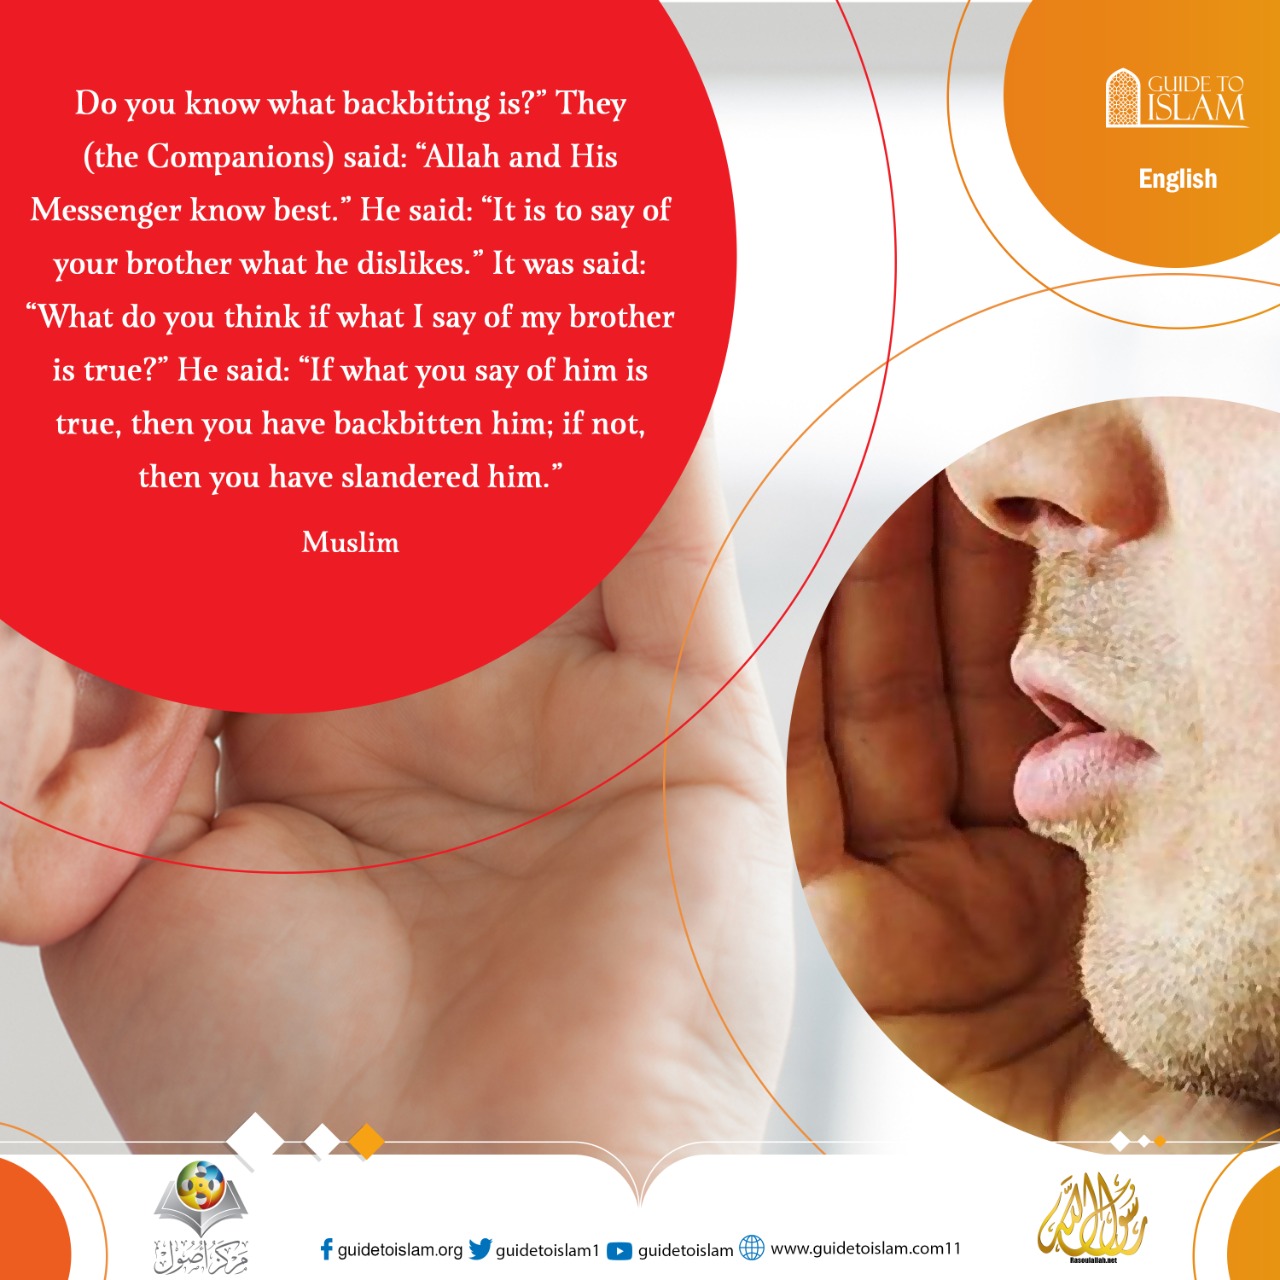 “Do you know what backbiting is?”